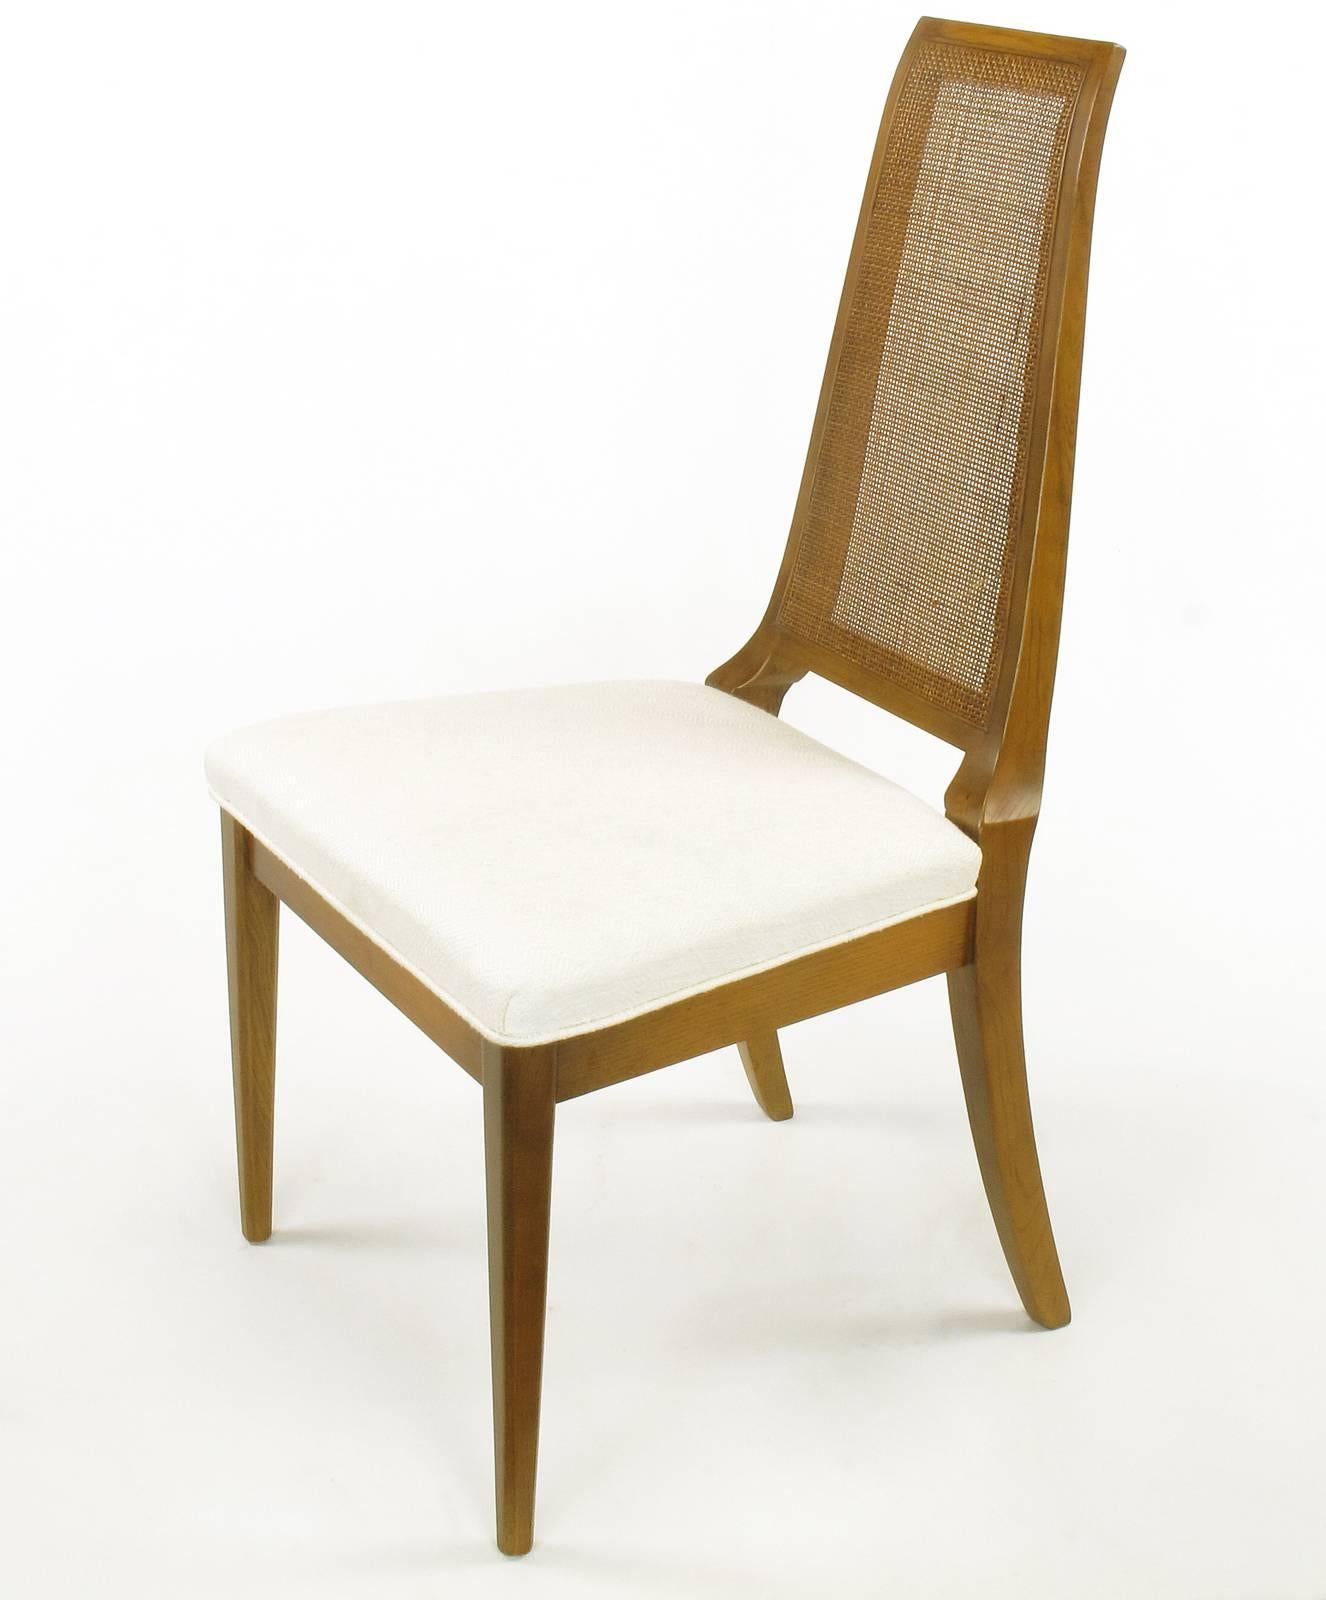 Mid-20th Century Sleek, circa 1950s Modern Walnut and Cane Dining Chairs For Sale